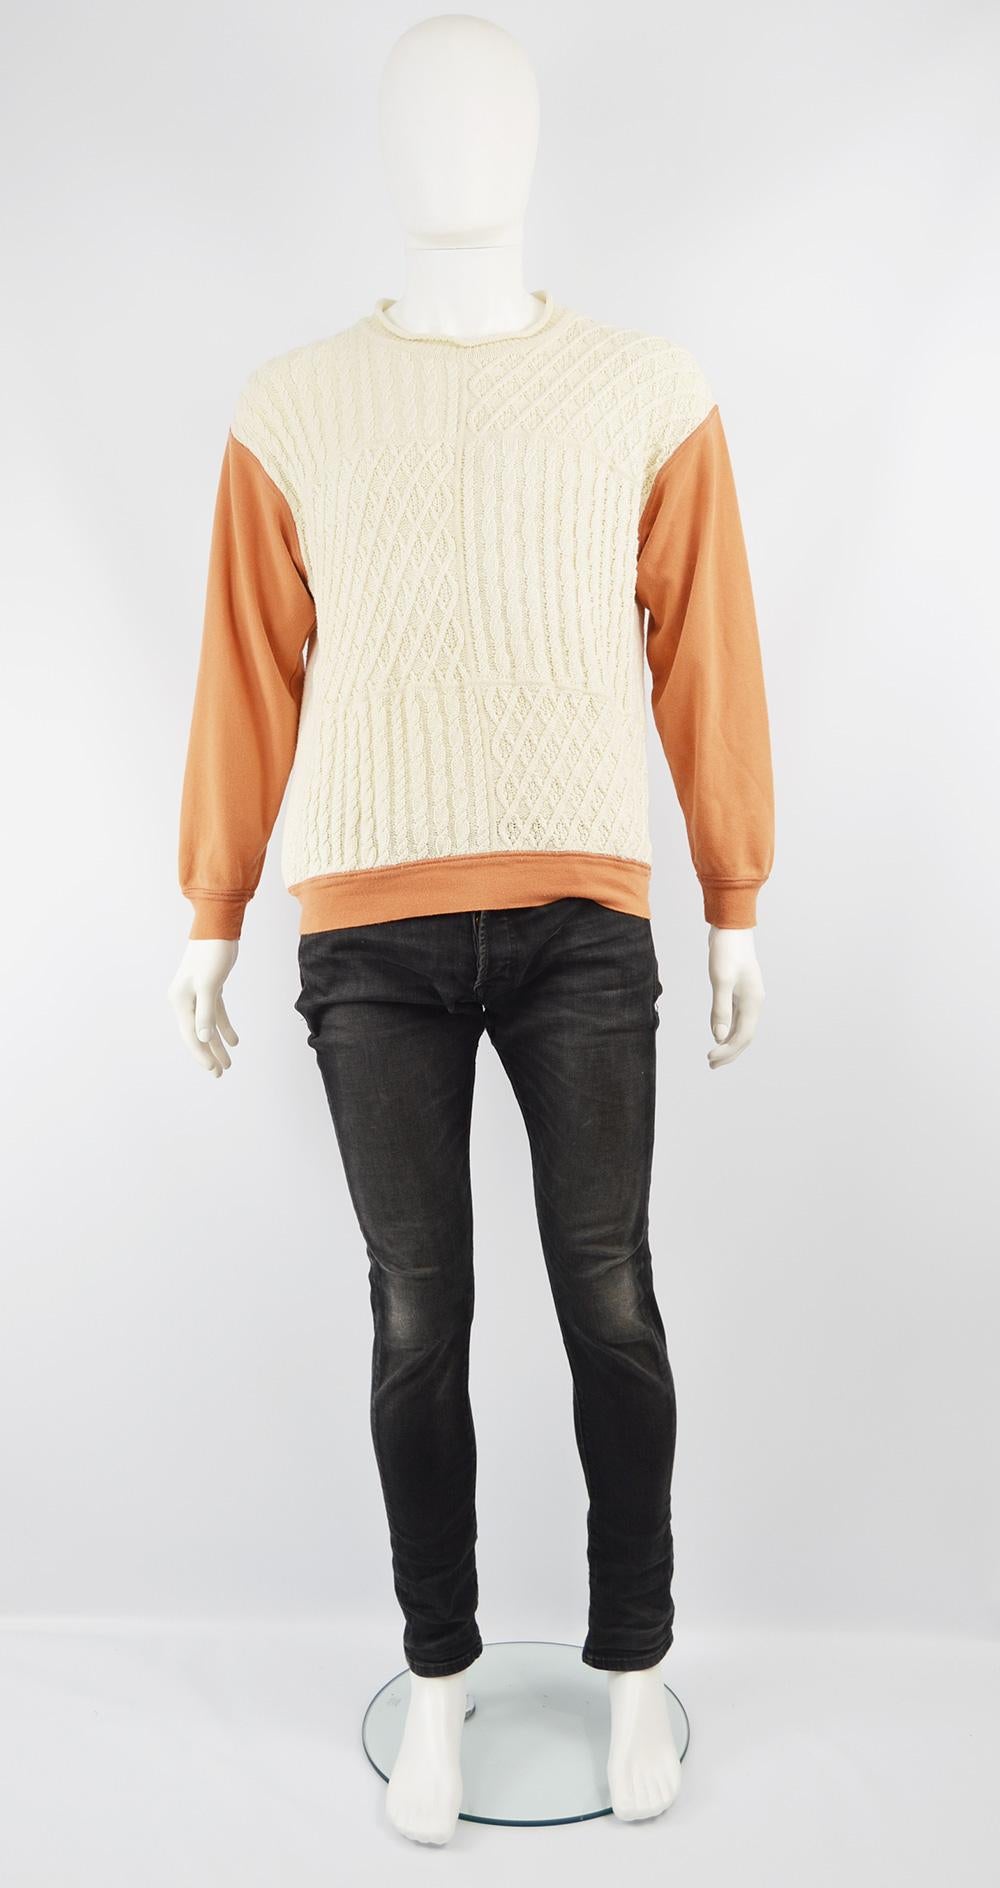 An excellent vintage men's sweater from the 90s by high end and highly collectible British fashion label, Joseph Tricot for their rare Homme line. Made in Italy, with intricate cream cotton cable knit designs on the front and back and an orange